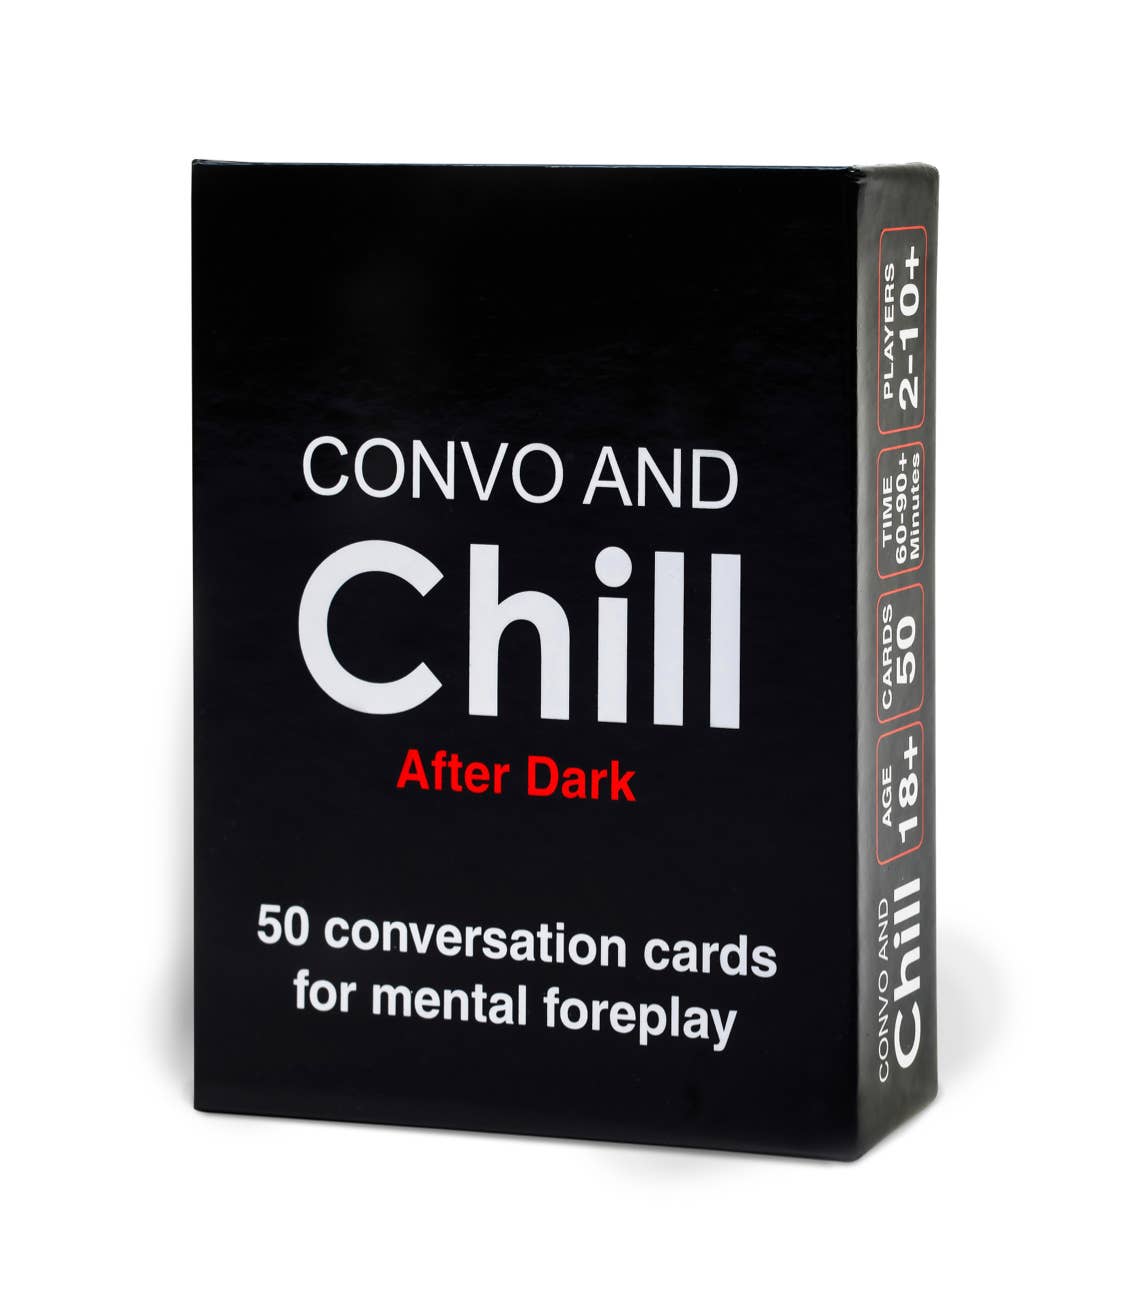 After Dark Edition - Convo and Chill